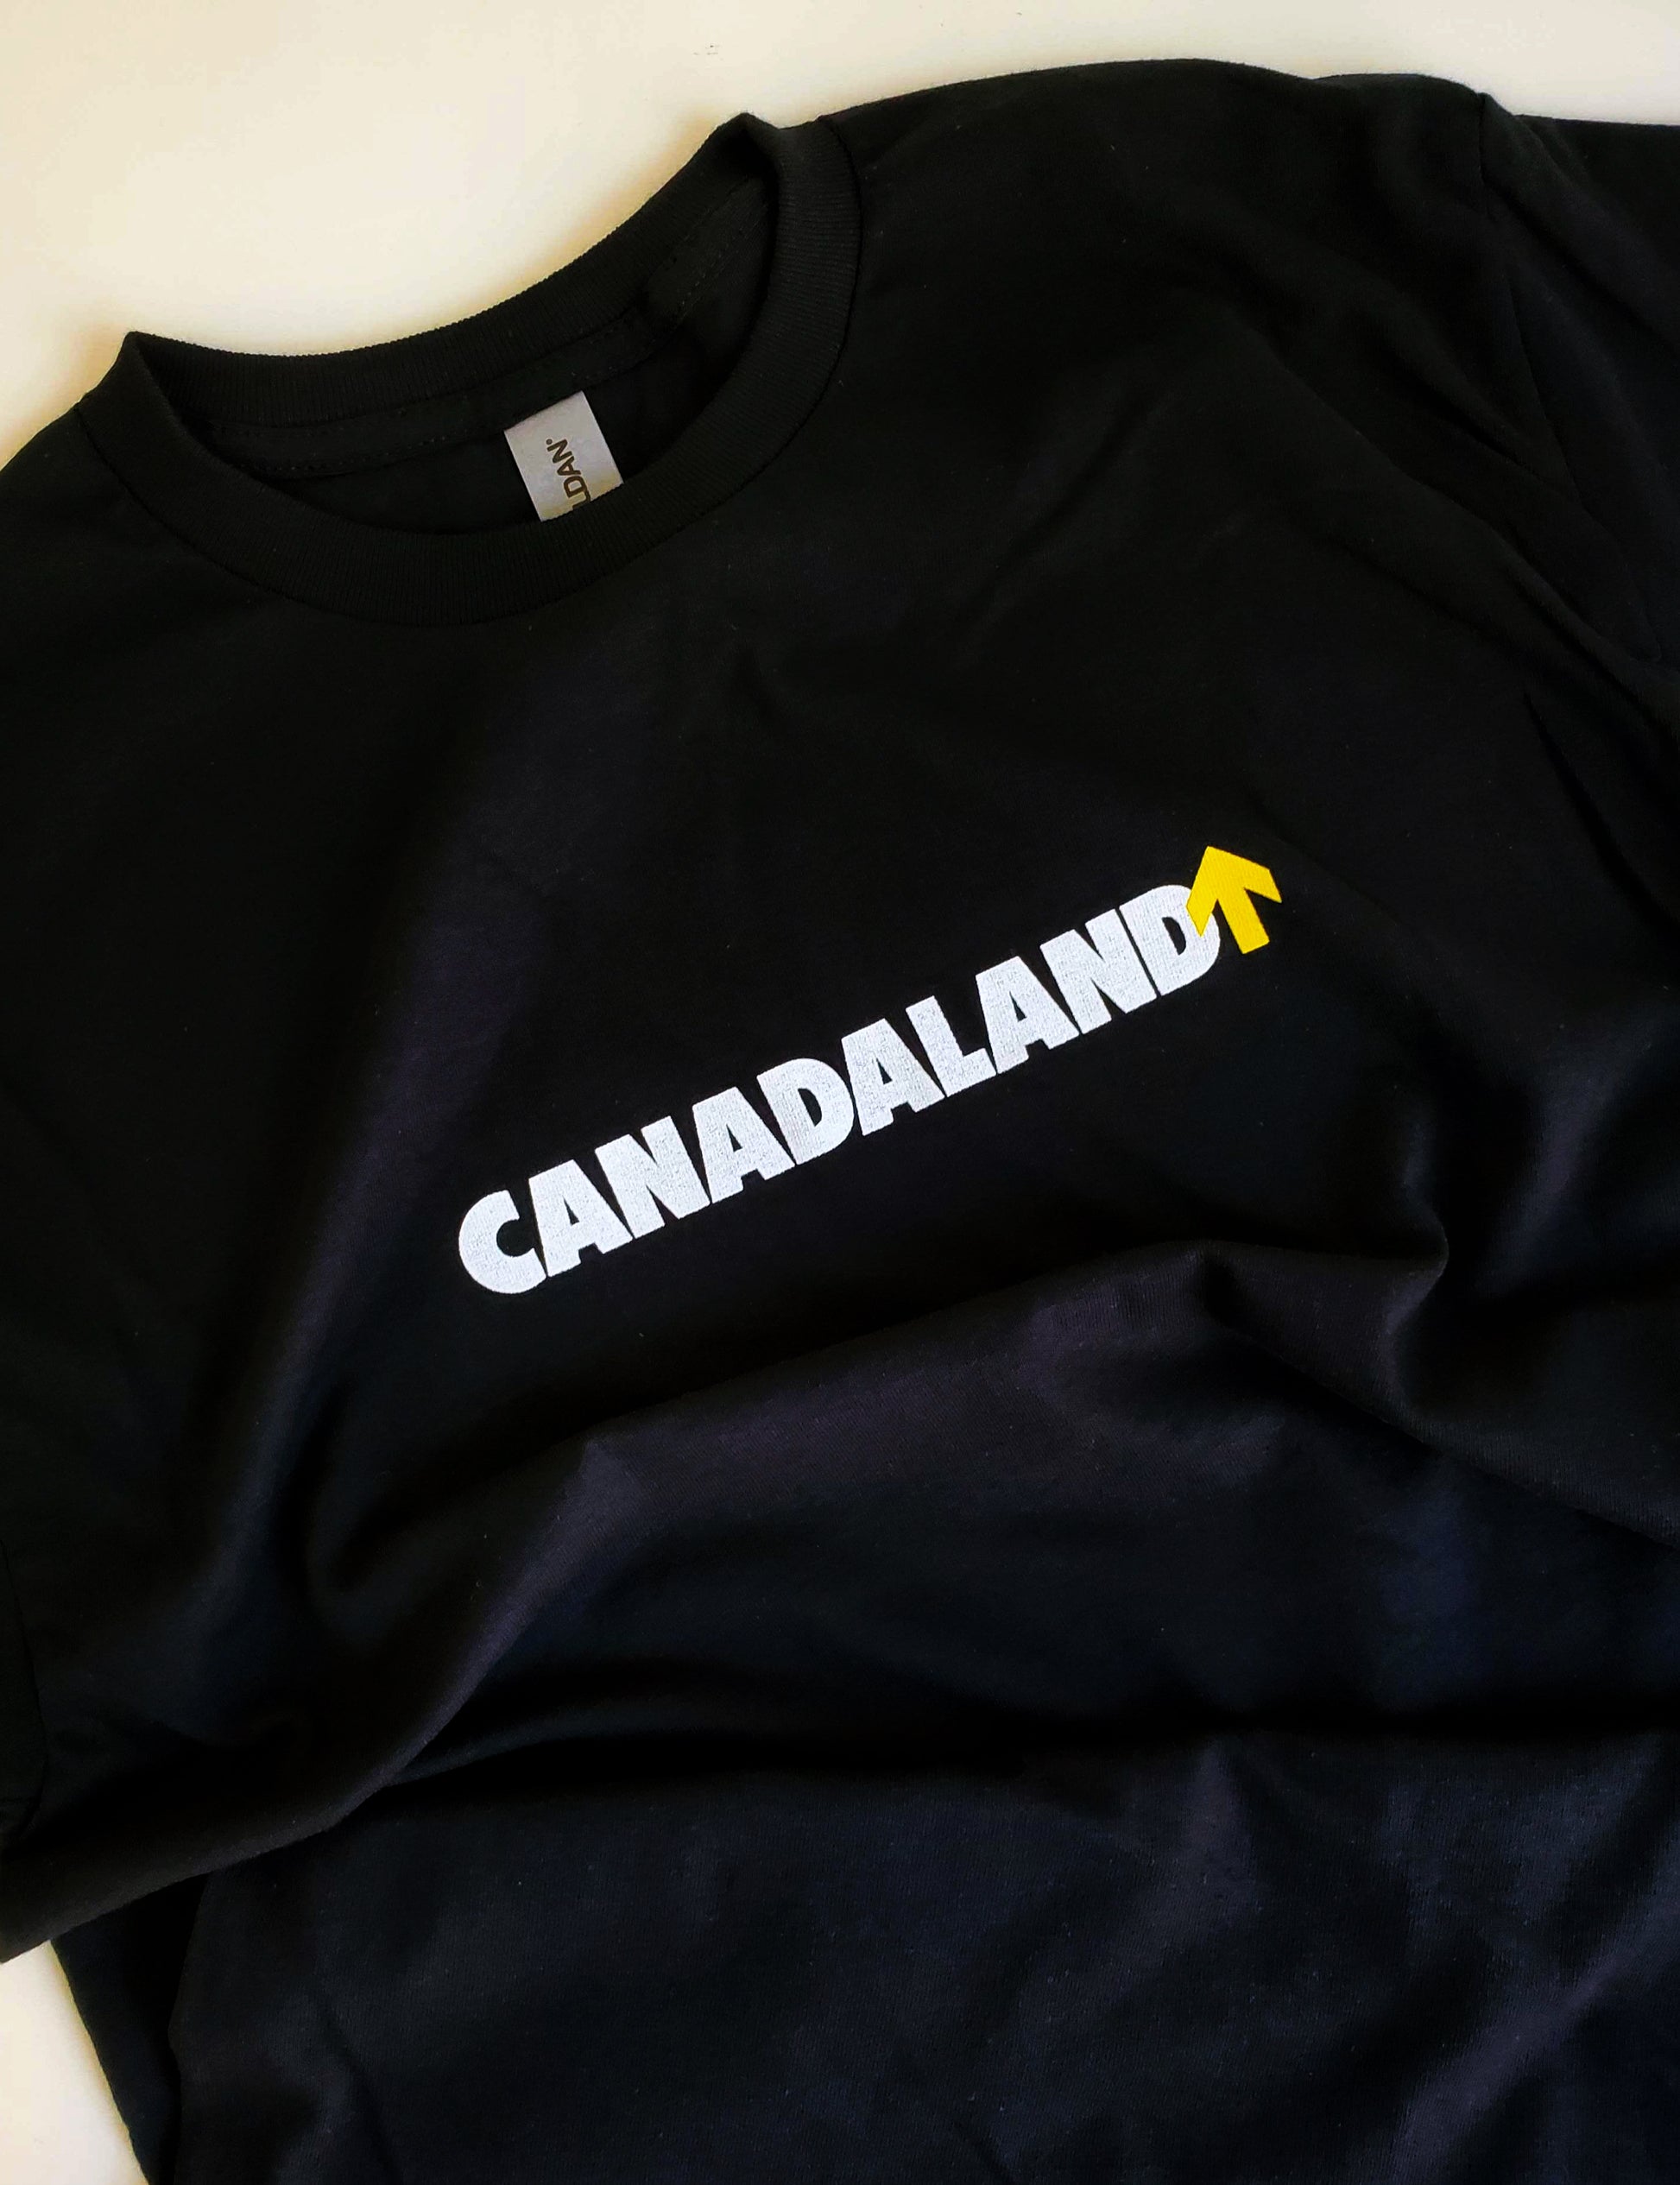 A black Gildan t-shirt, in 100% heavy weight cotton, with the Canadaland logo horizontal across the chest in white text and a yellow arrow.